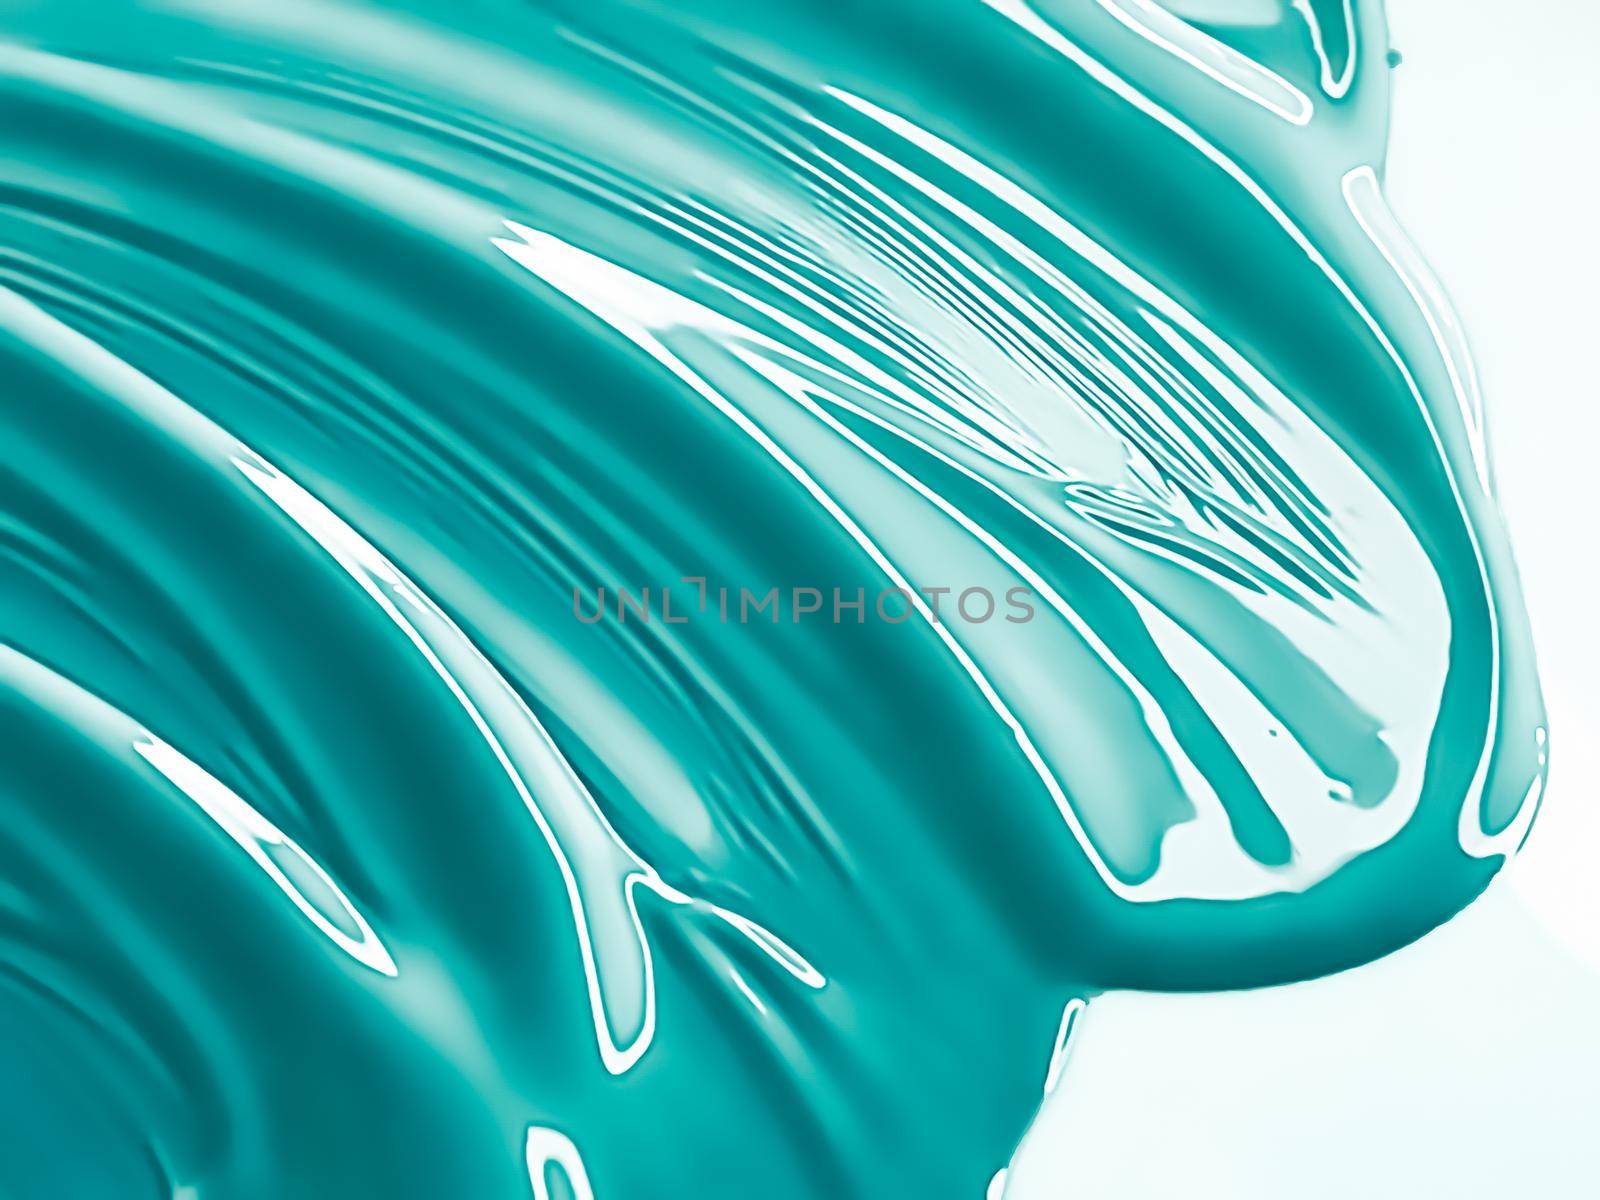 Glossy green cosmetic texture as beauty make-up product background, cosmetics and luxury makeup brand design concept